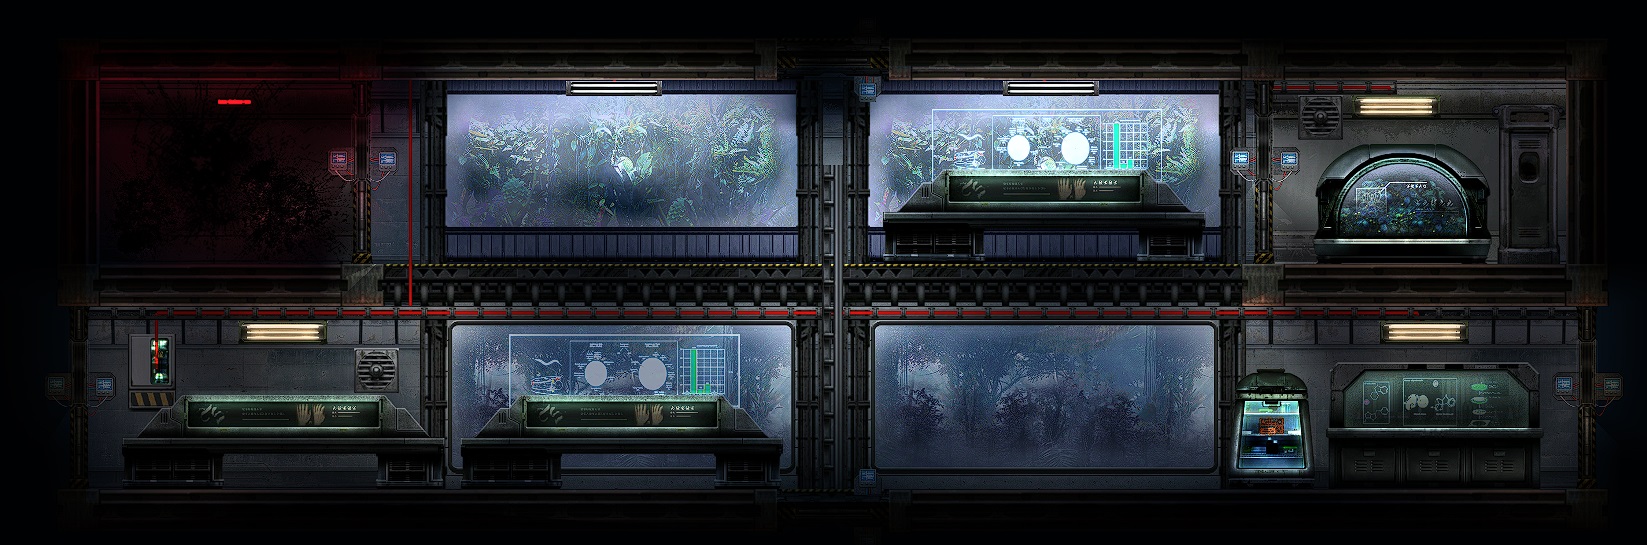 Barotrauma research outpost concept